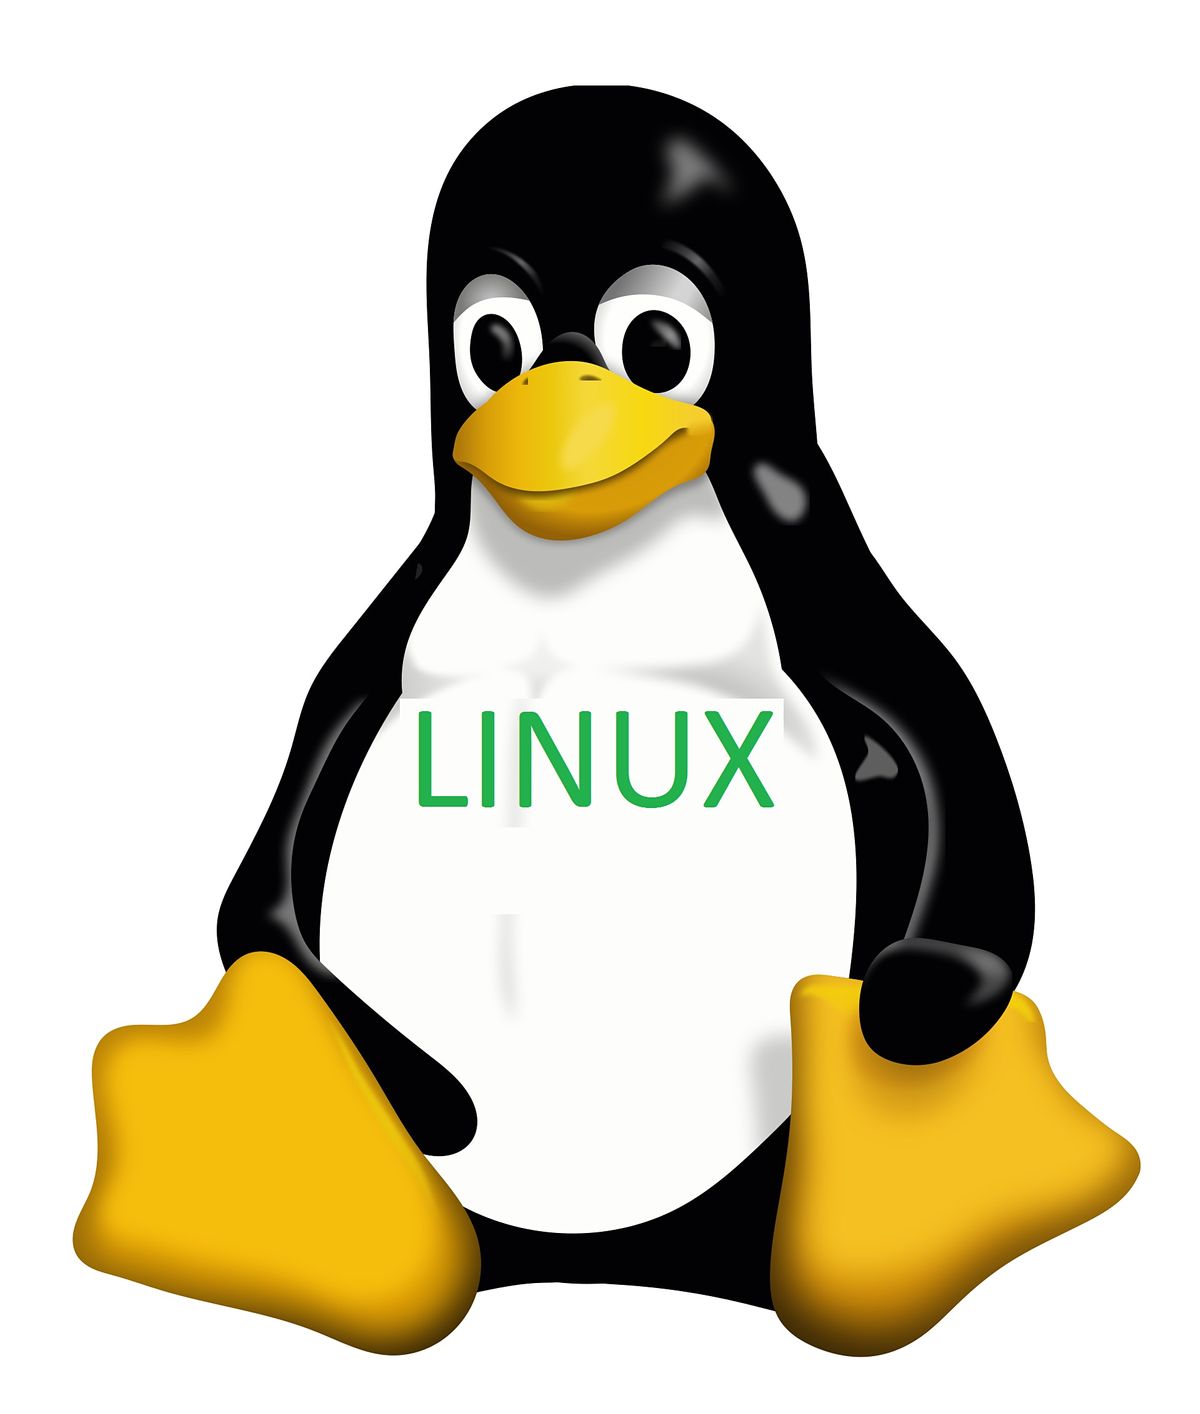 4 Weeks Linux and Unix Training Course in Allentown